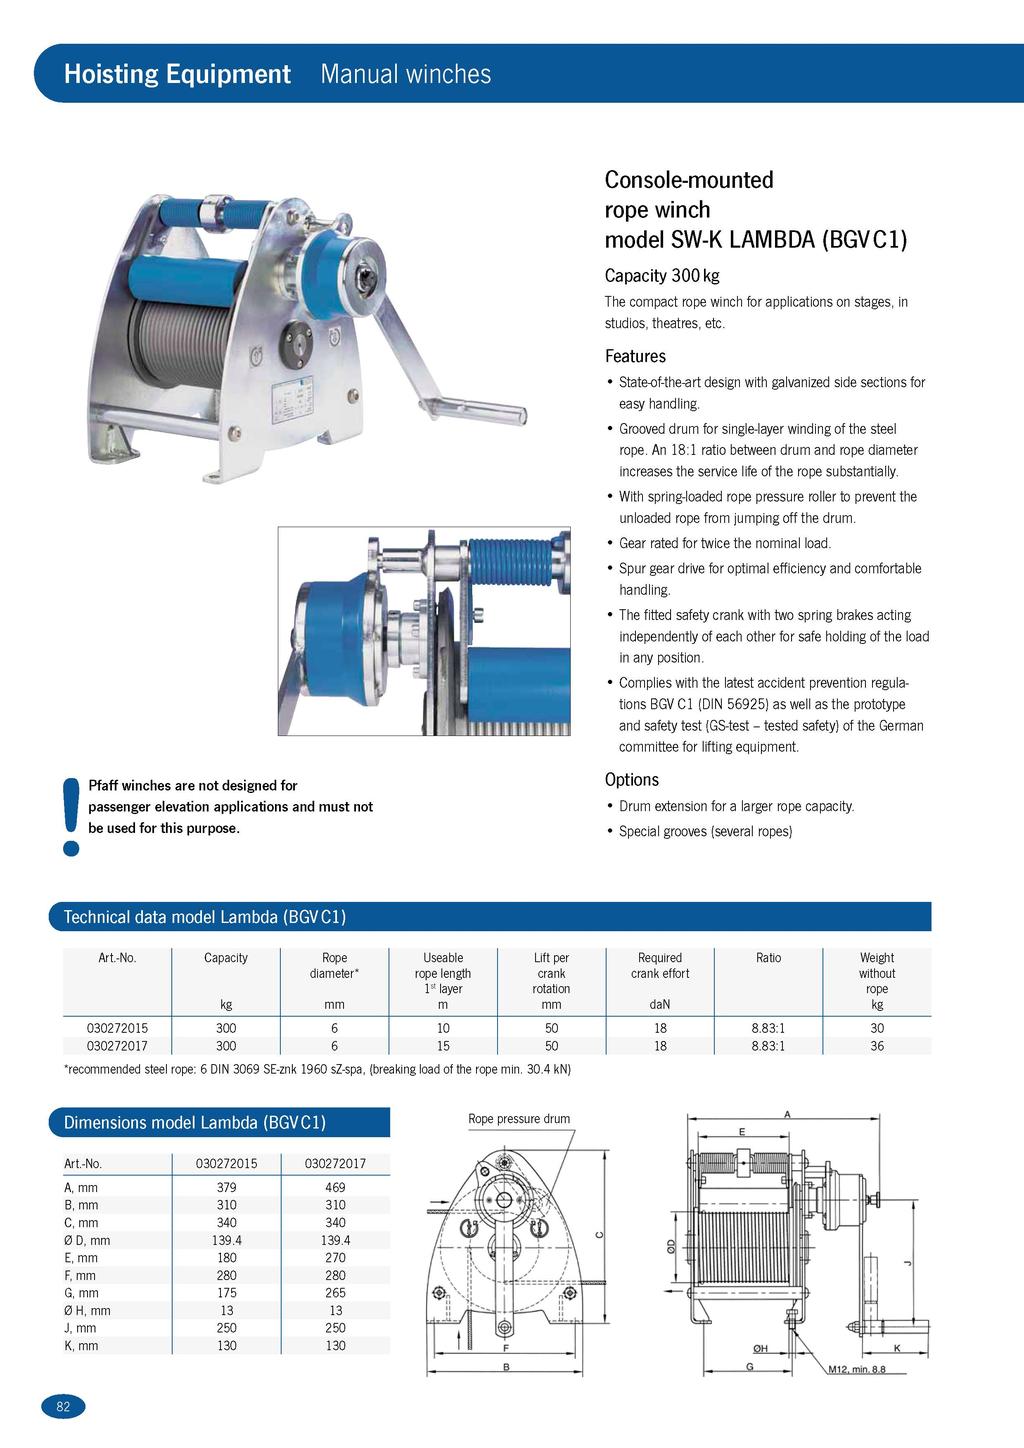 Hoisting Equipent Manual winches Console-ounted winch odel SW-K LAMBDA (BGVC1) 300 The copact winch for applications on stages, in studios, theatres, etc.